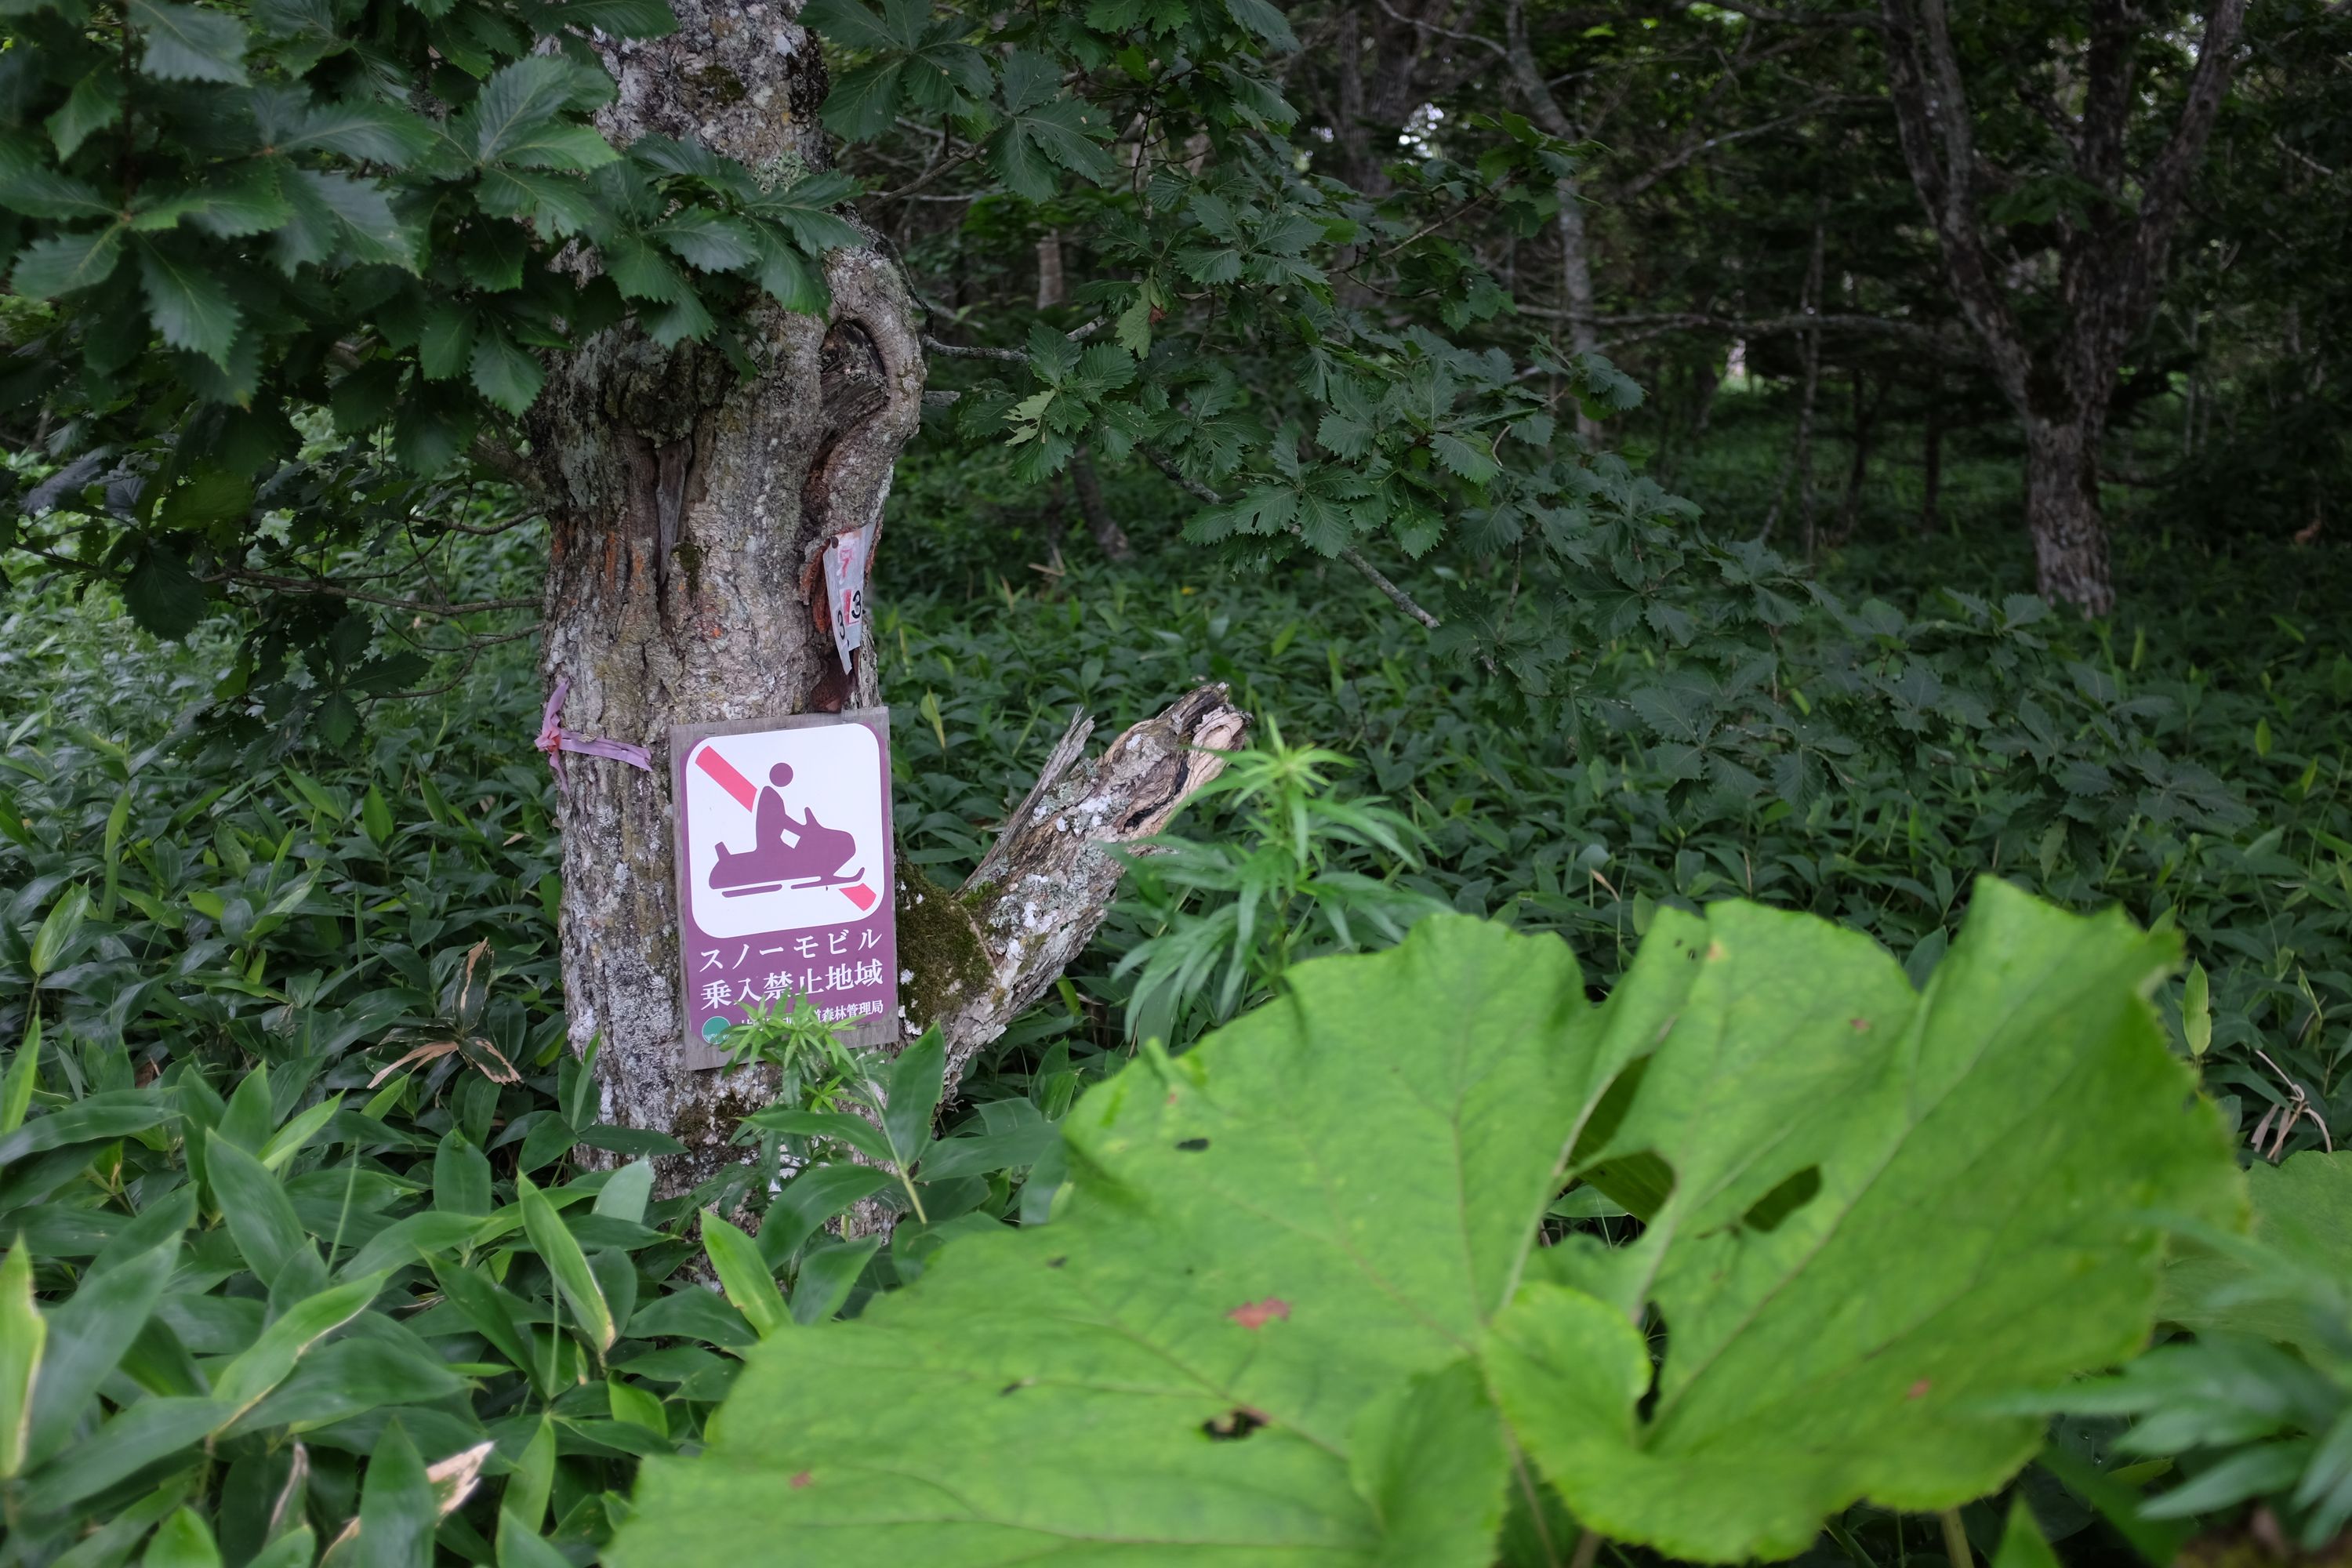 A sign warning against snowmobile use in a thick undergrowth entirely unsuitable for using a snowmobile.